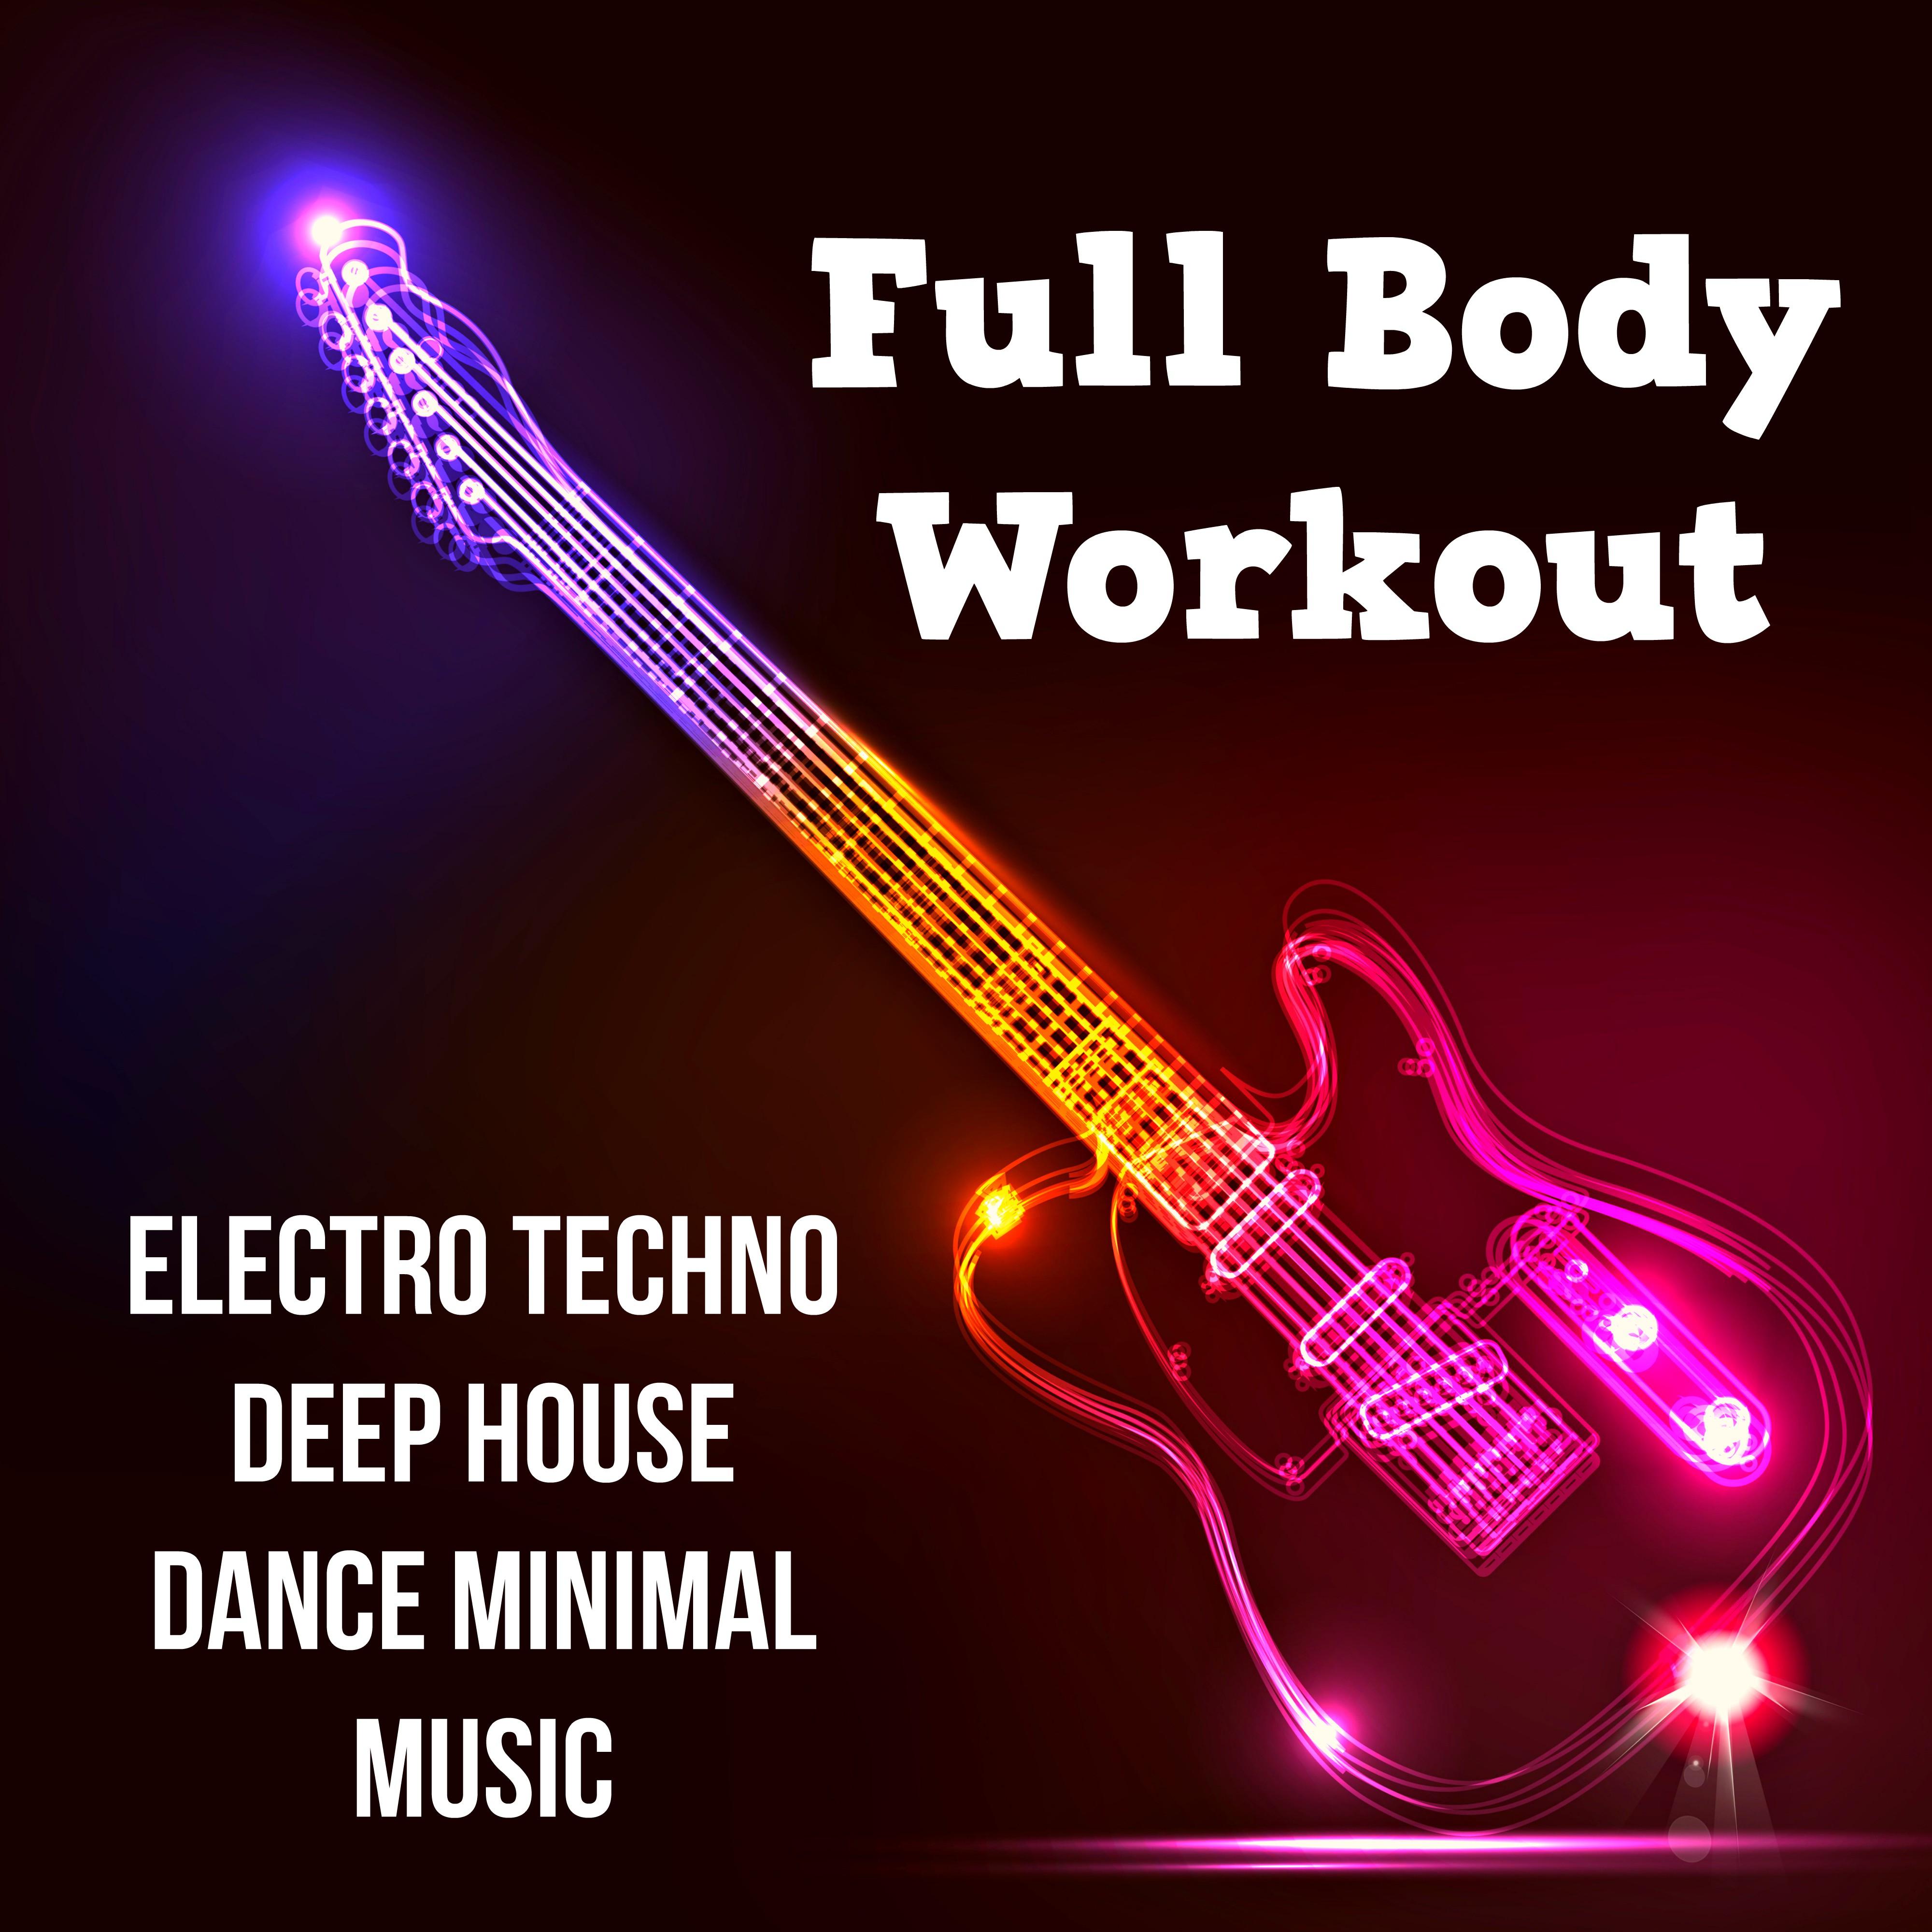 Full Body Workout - Electro Techno Deep House Dance Minimal Music for High Intensity Cardio Fitness and Perfect Party